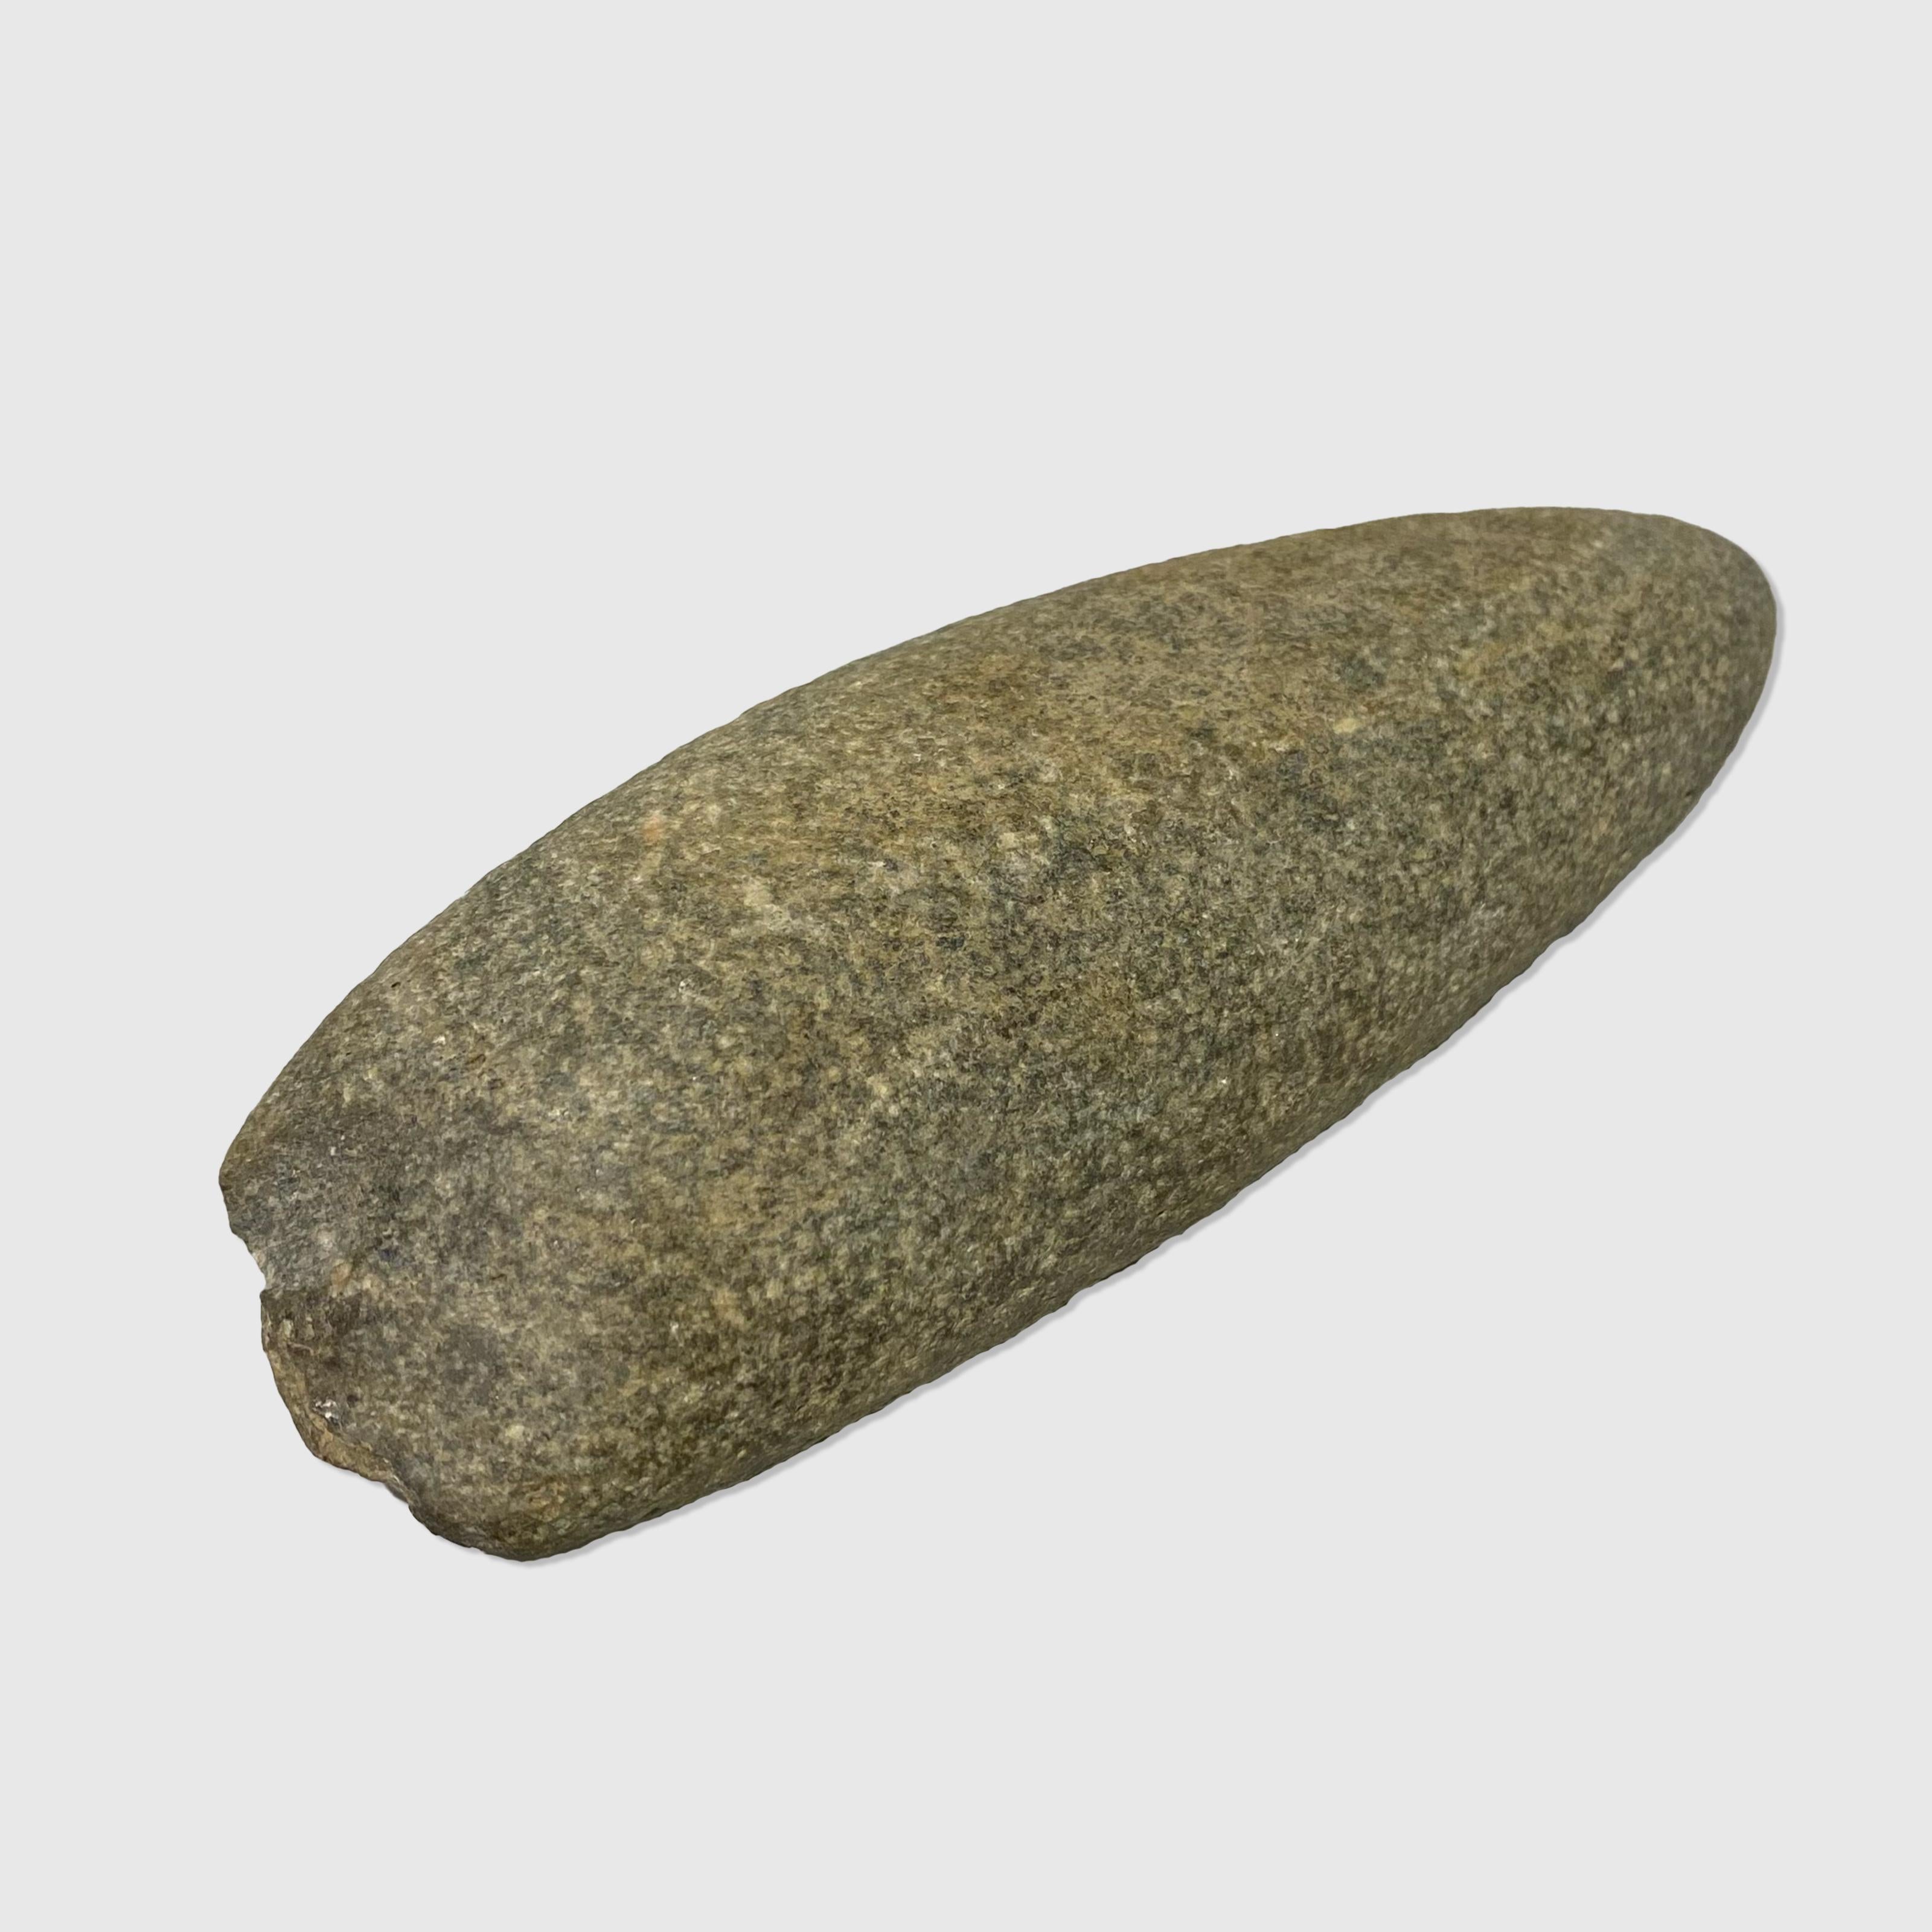 Moroccan Neolithic Stone Age Tool - Large For Sale